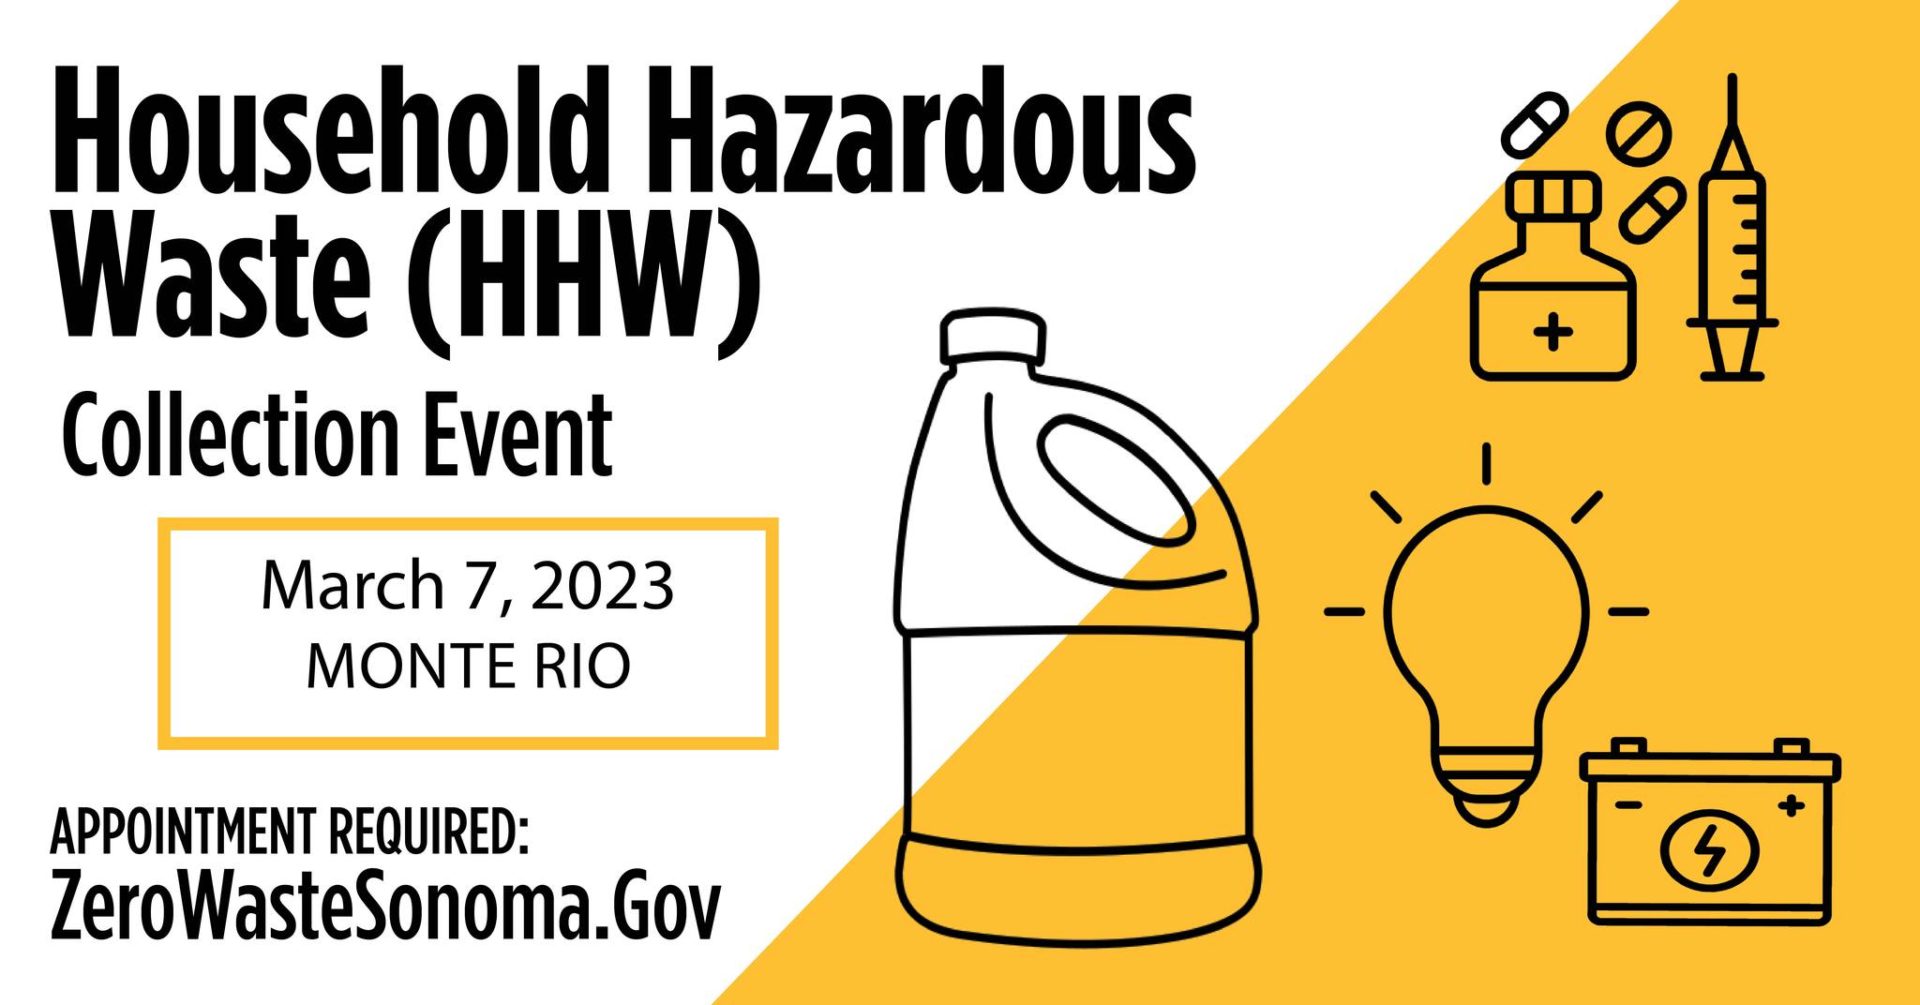 Household Hazardous Waste Collection Event Image